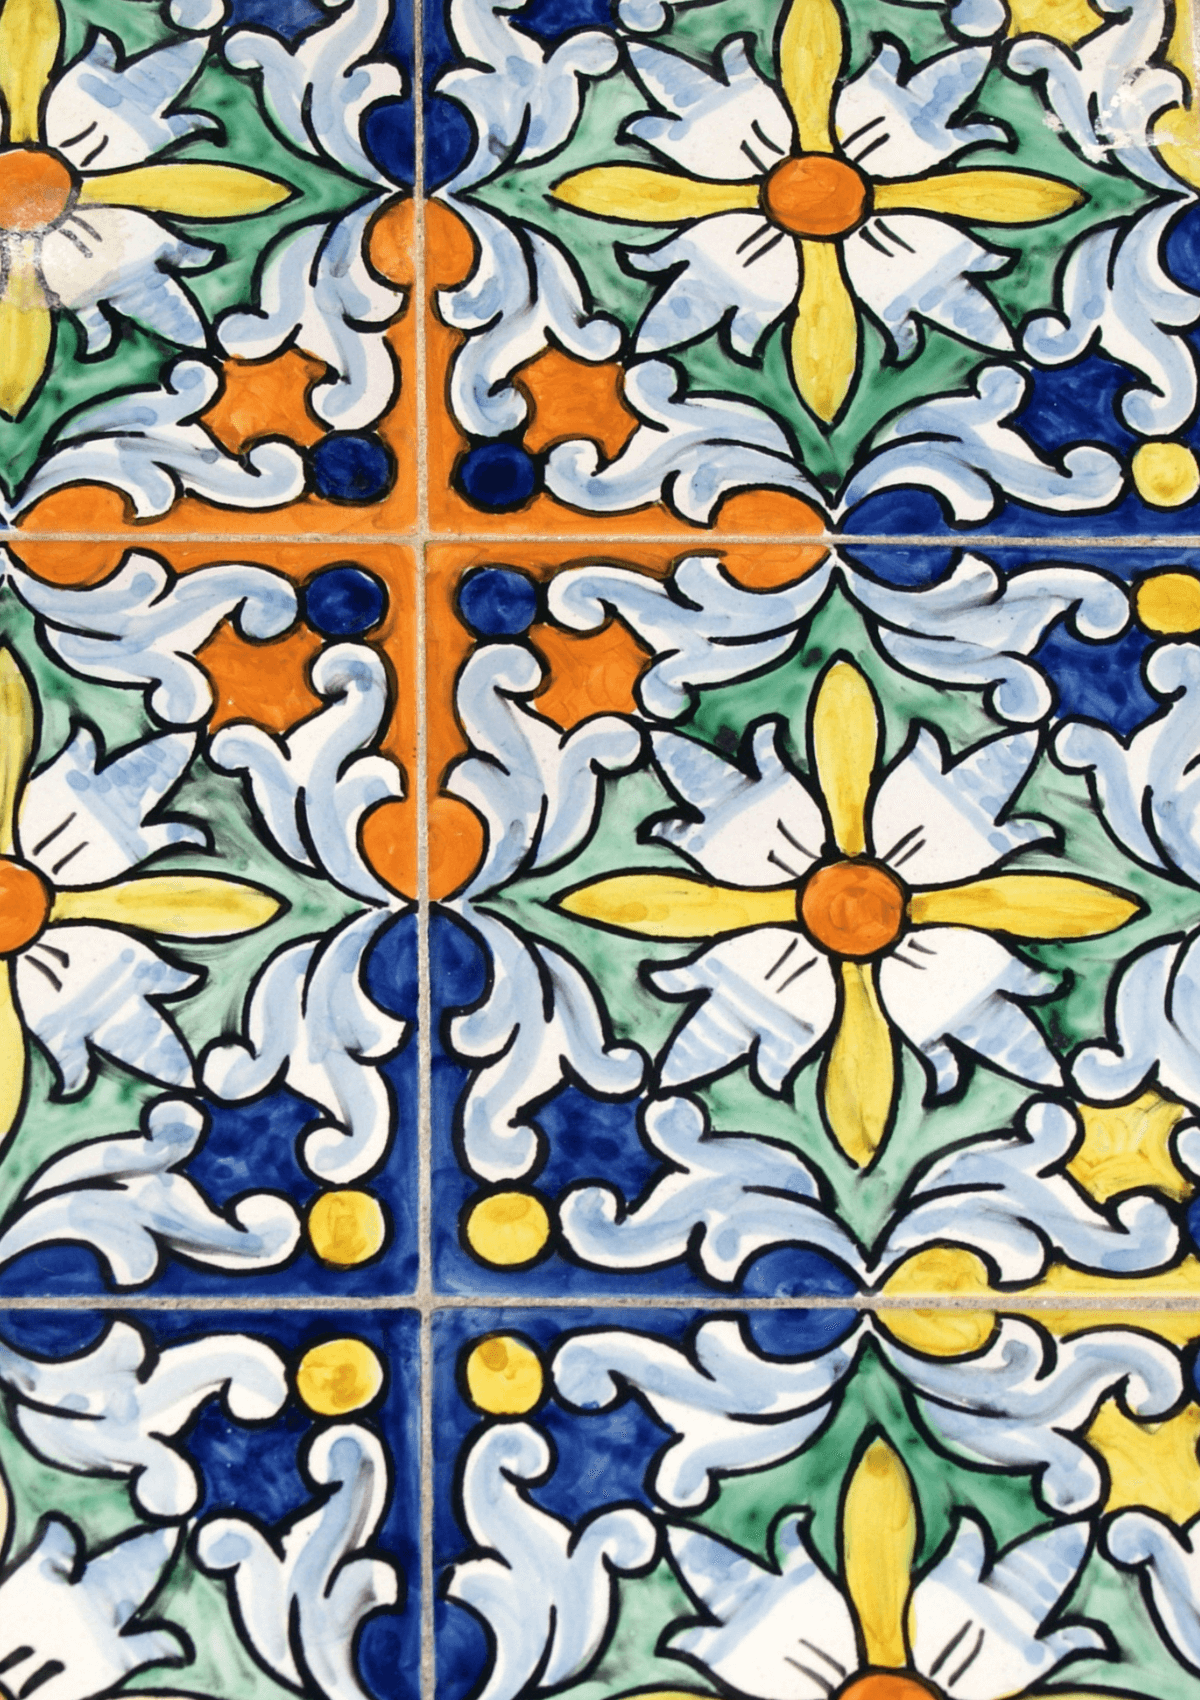 Spanish tiles are some of the best souvenirs from Spain